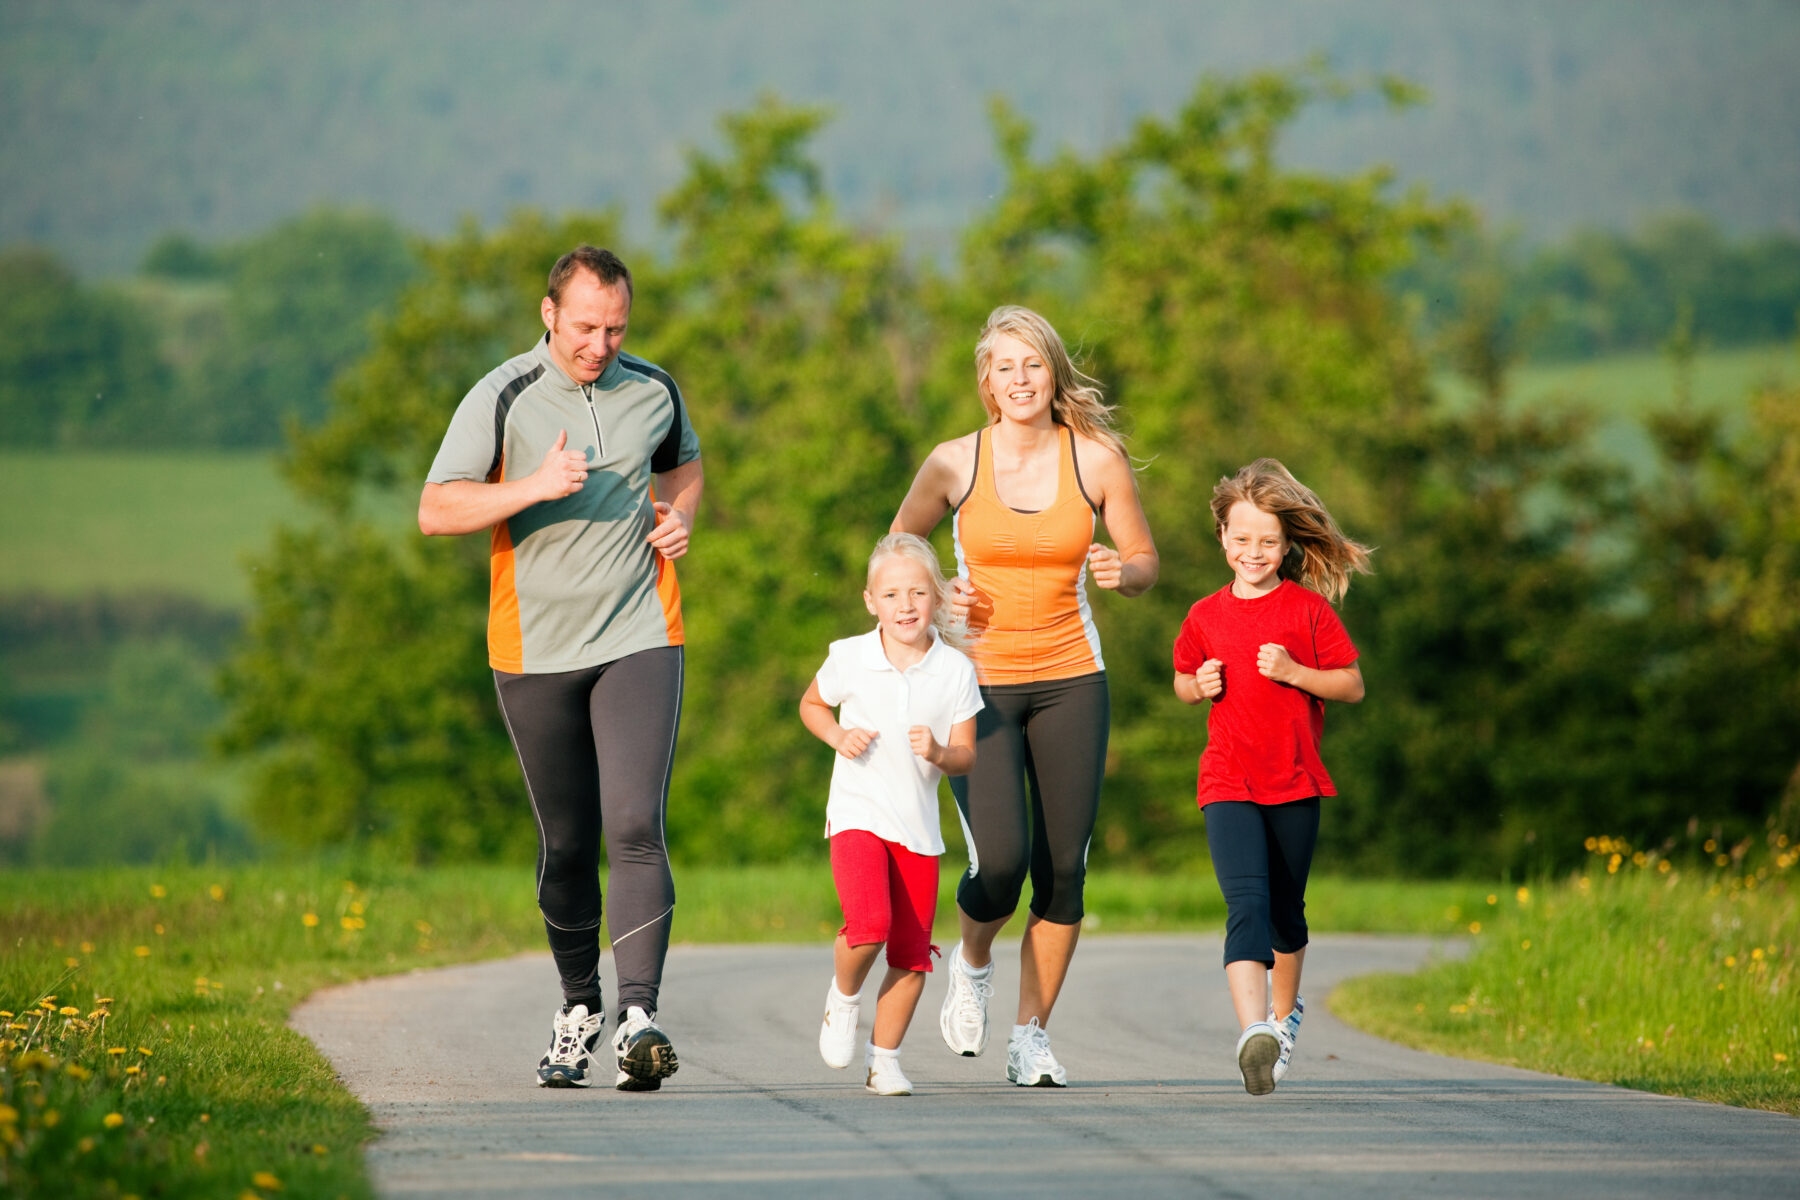 Family of different ages enjoying exercise time